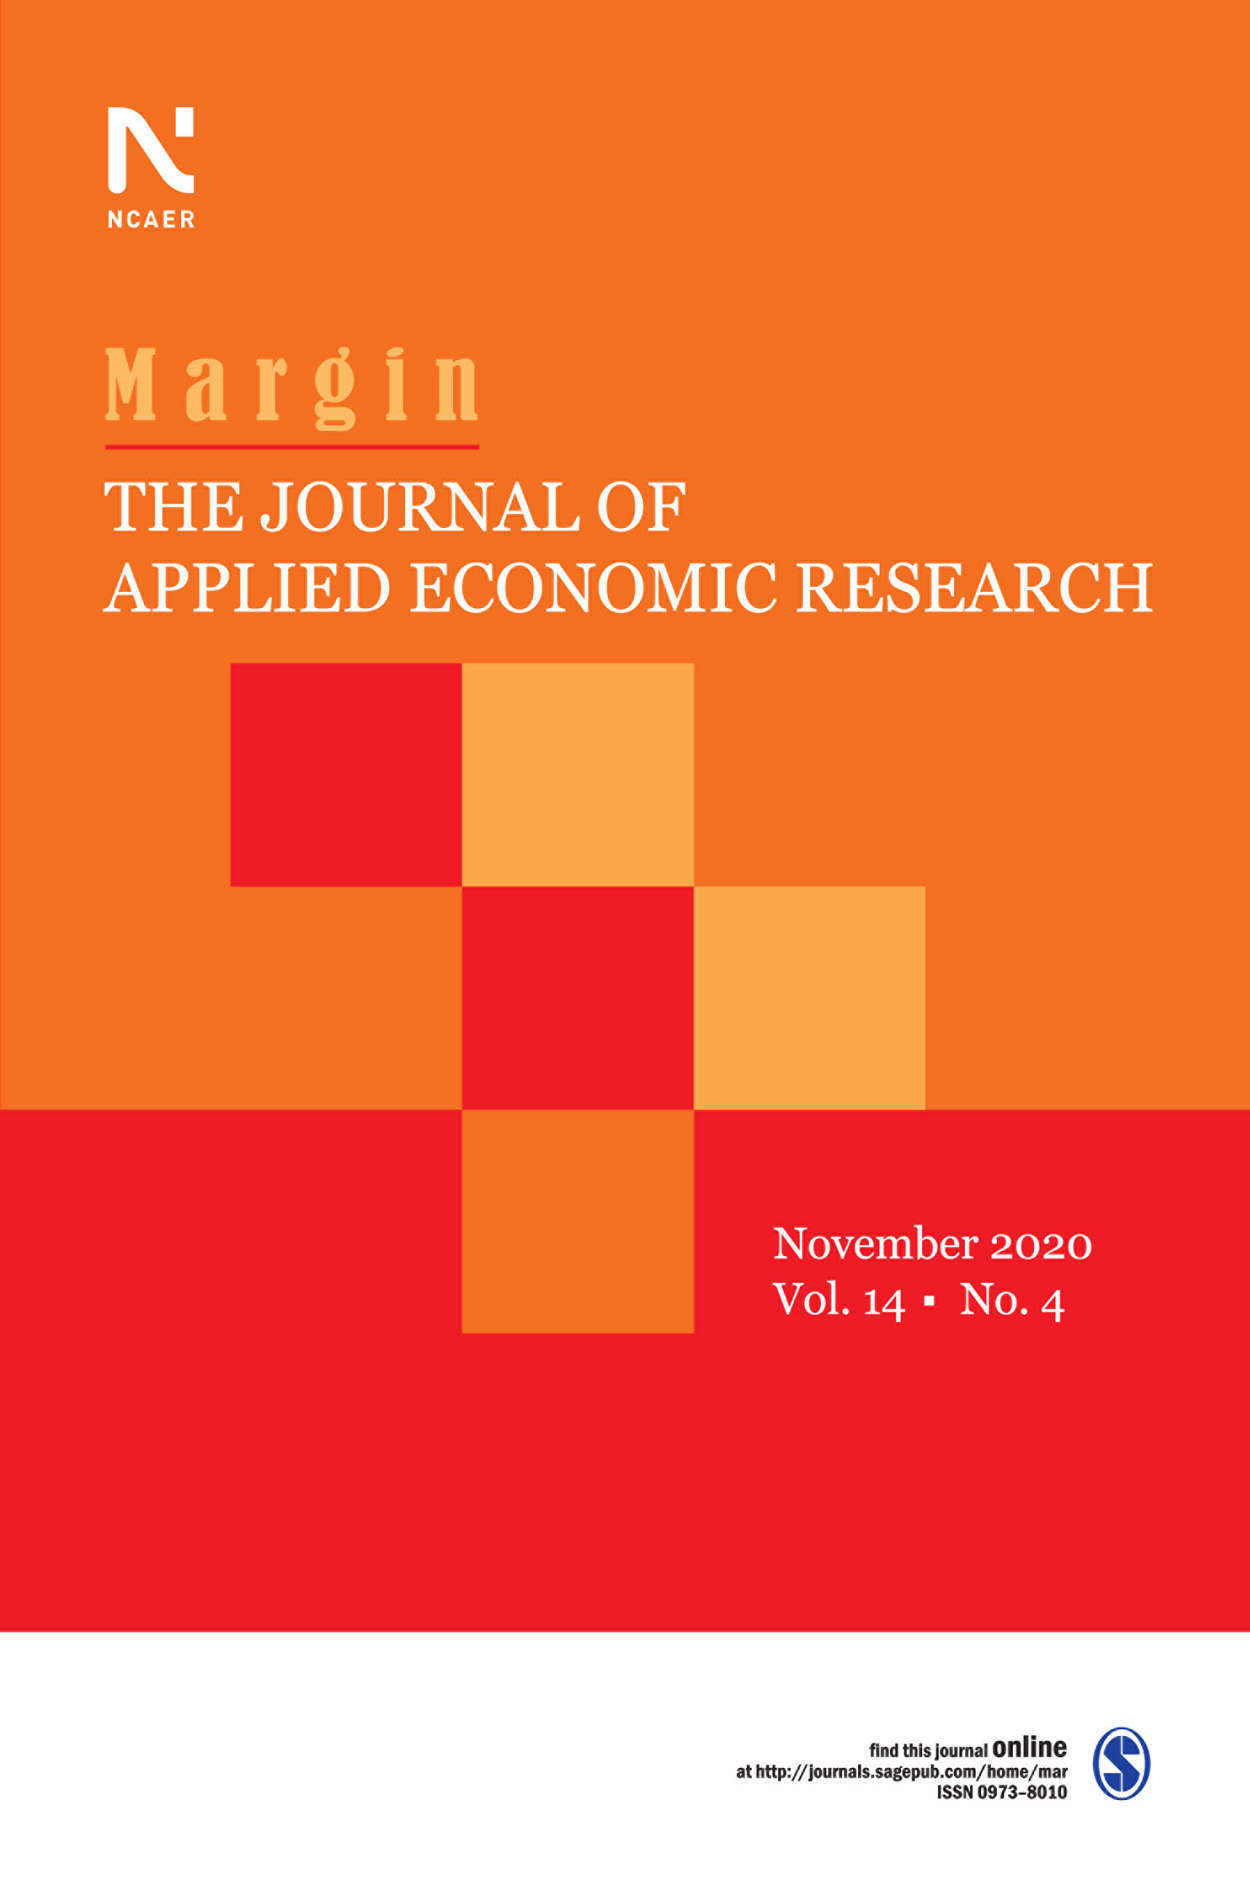 Margin: The Journal of Applied Economic Research